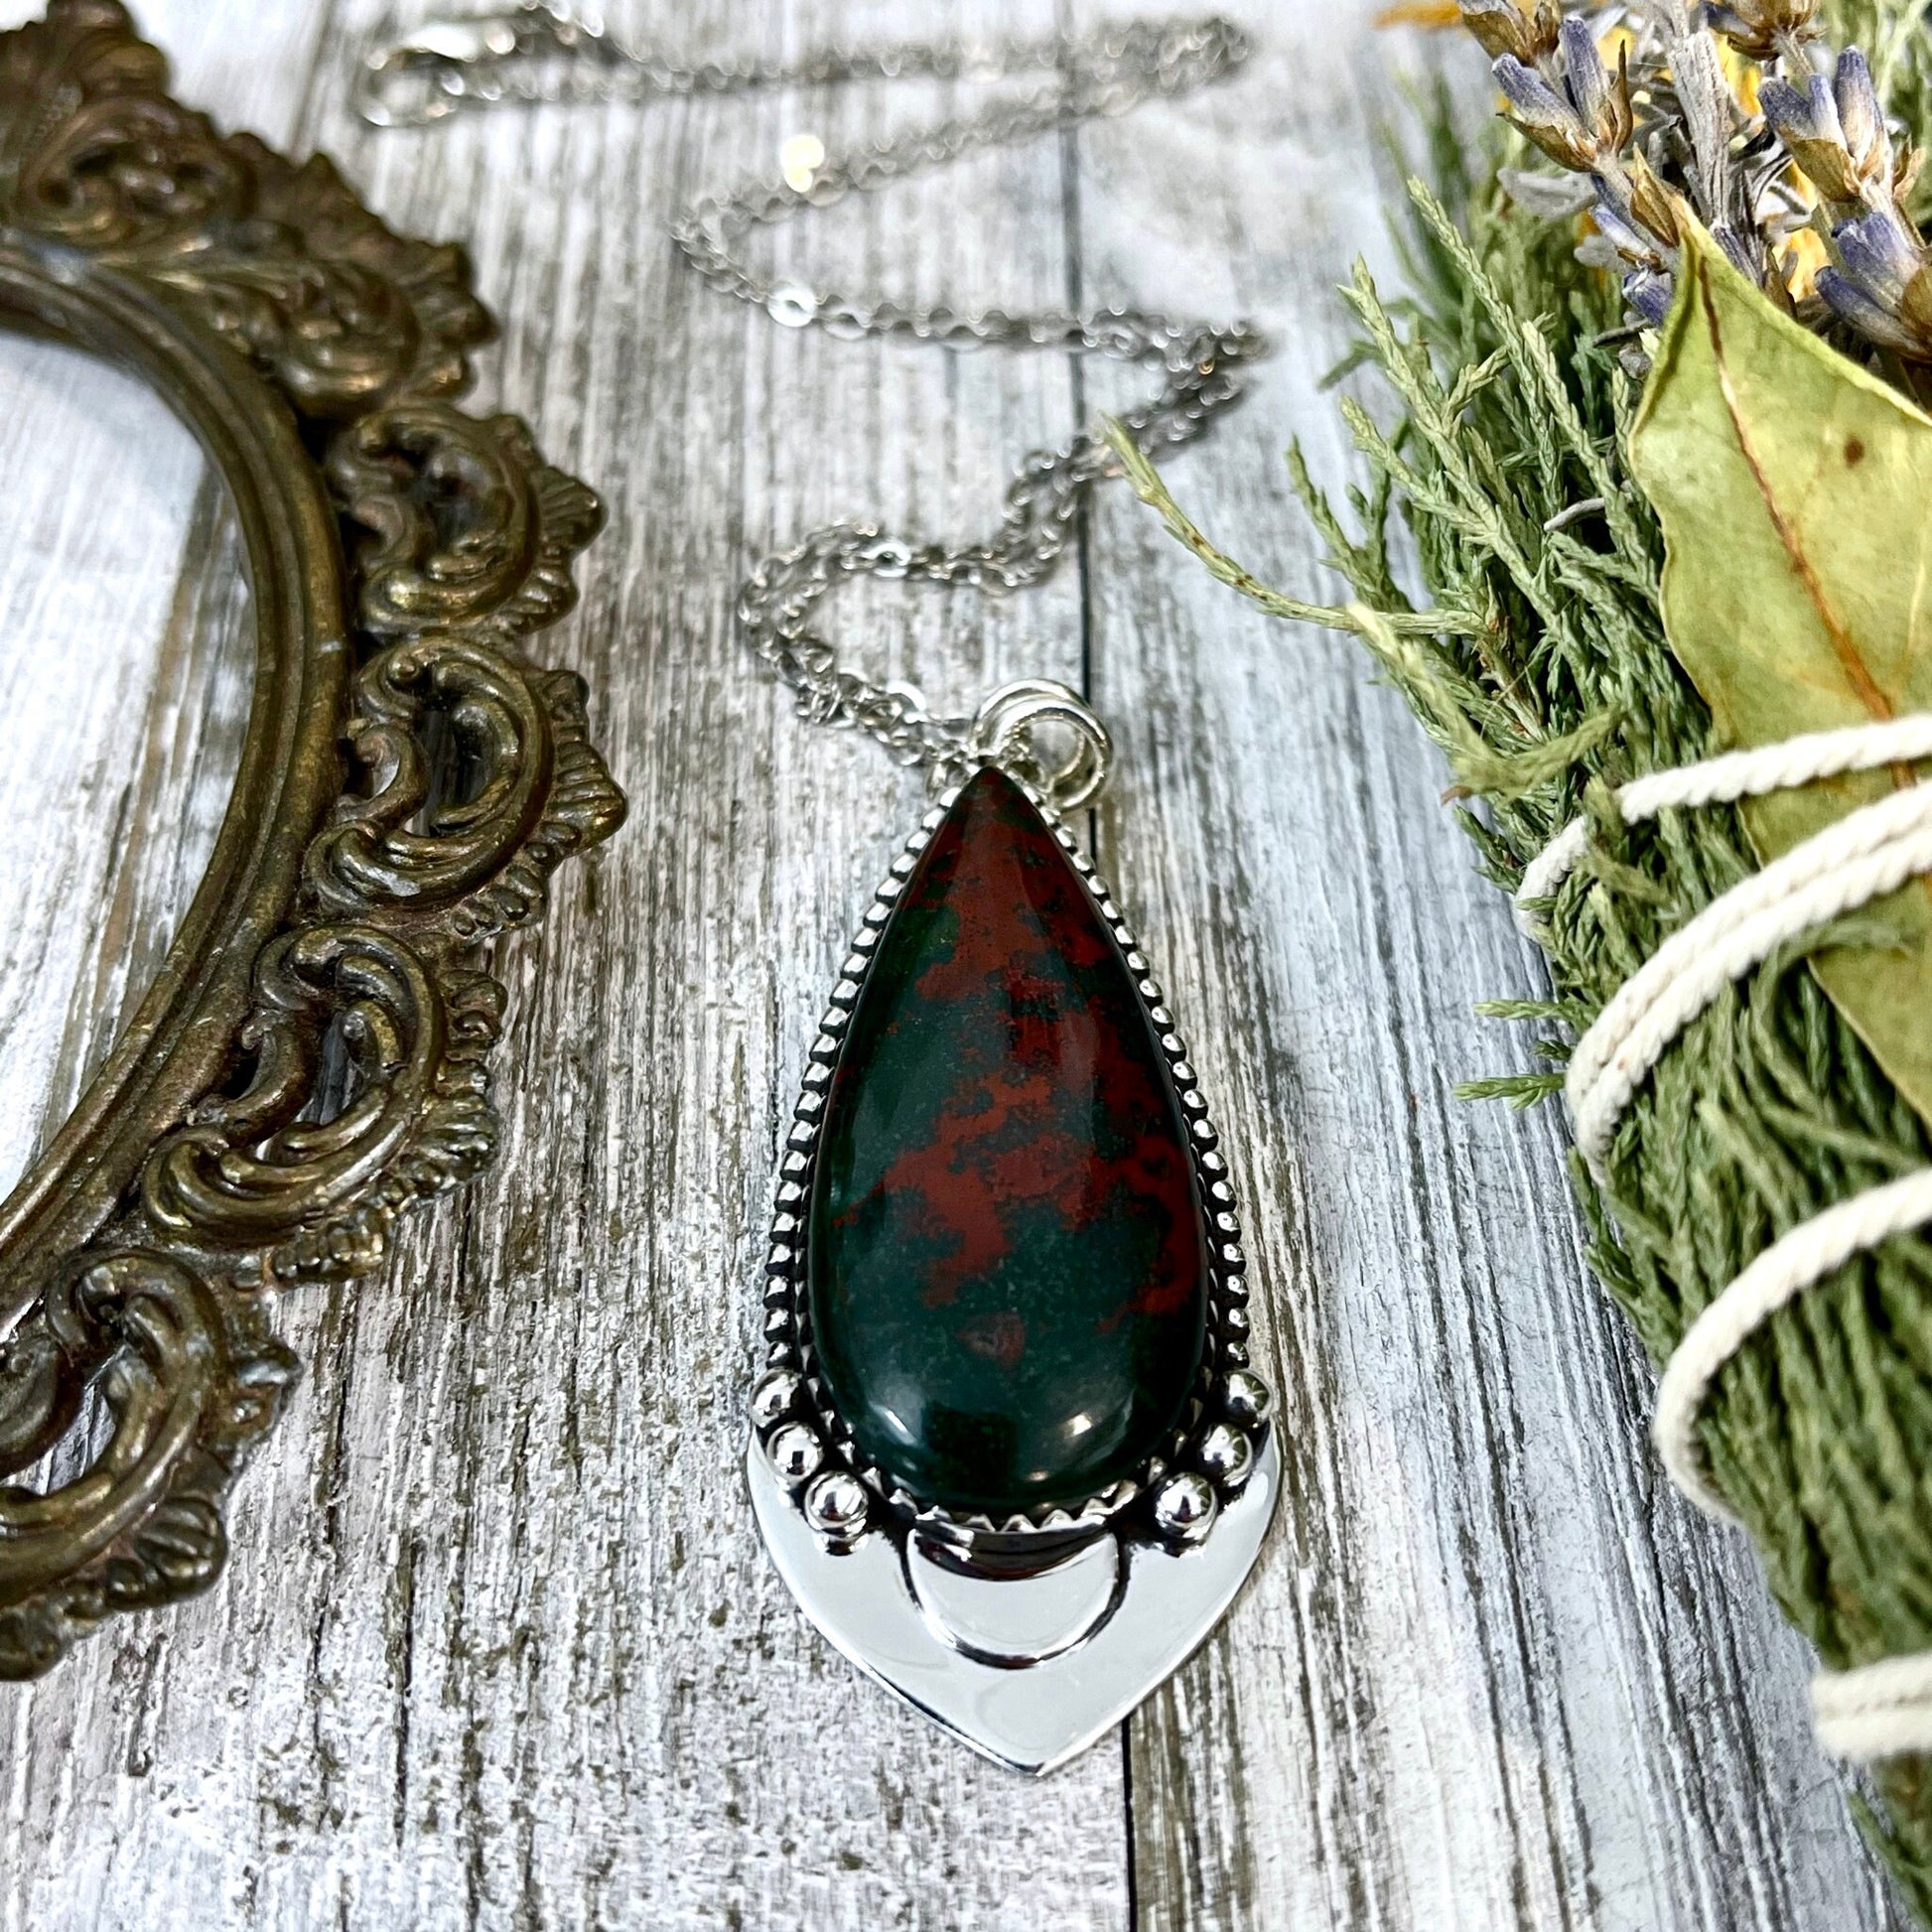 Midnight Moon Necklace - Bloodstone Crystal Teardrop Necklace in Sterling Silver -Designed by FOXLARK Collection/ Witchy Crystal Necklace